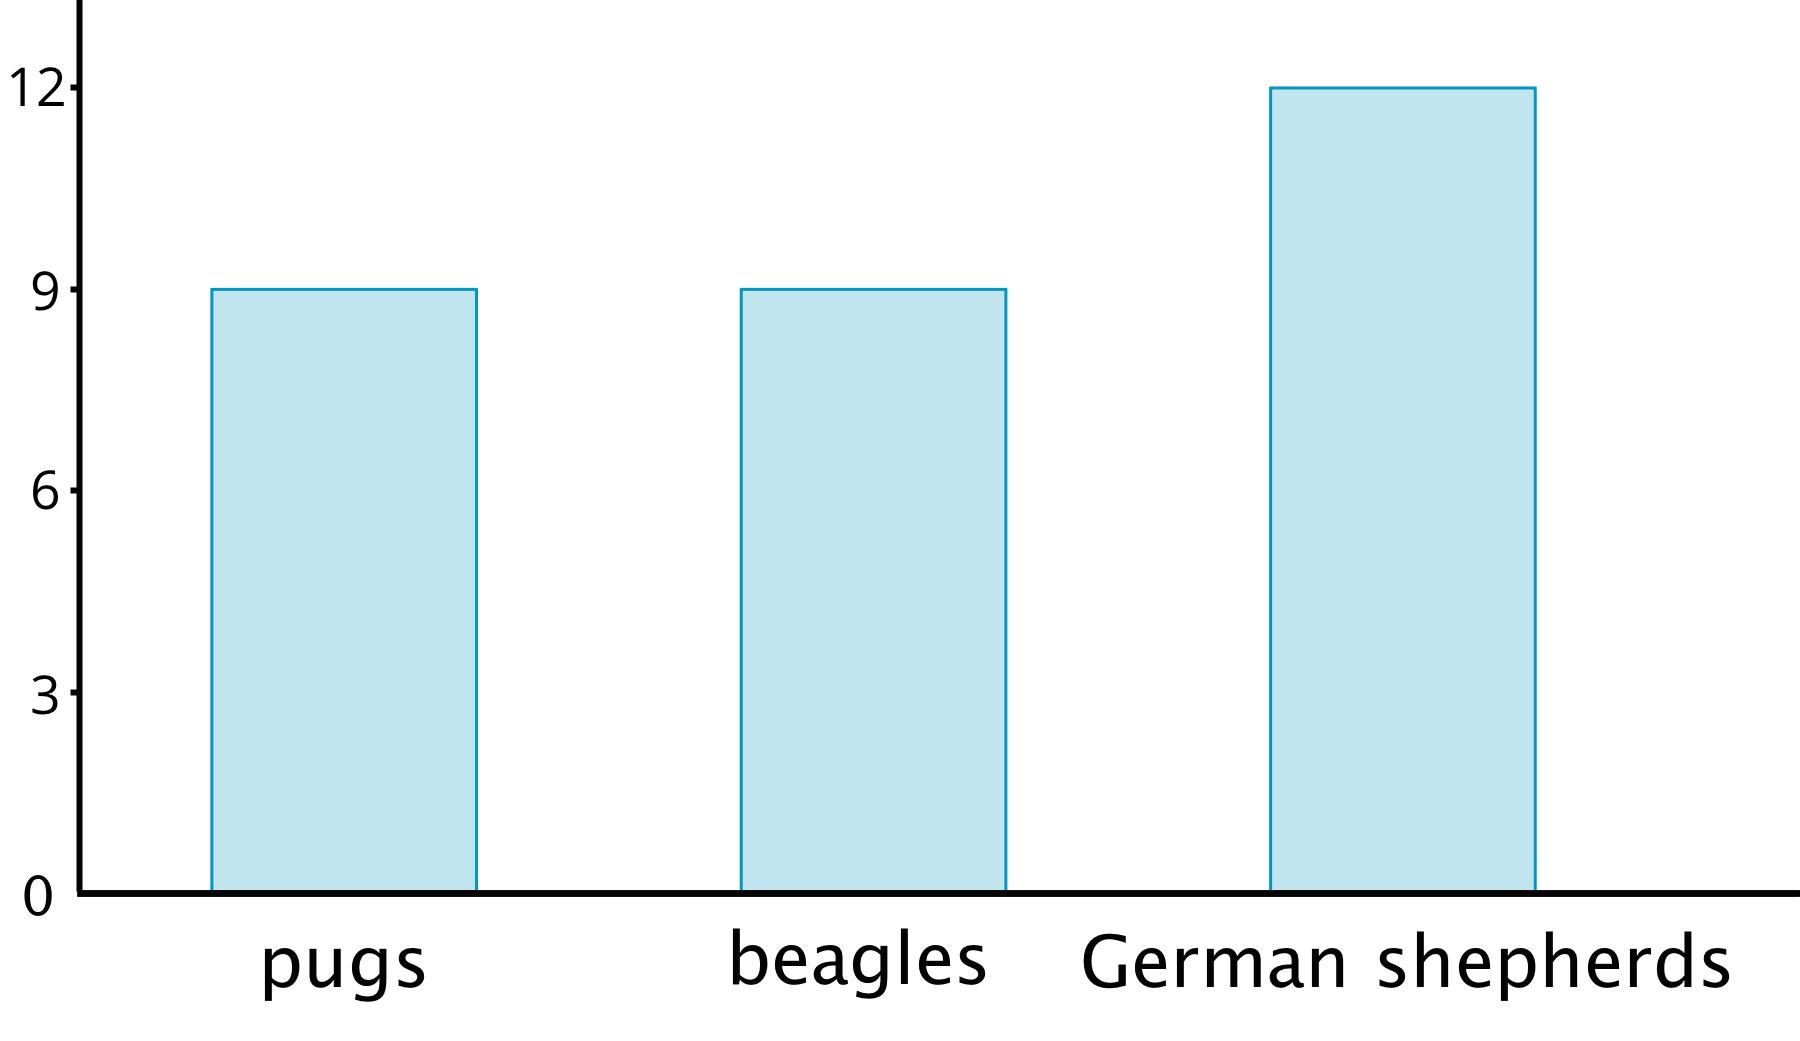 A bar graph. The categories “pugs”, “beagles”, and “German shepherds” are labeled on the horizontal axis. The numbers 0 through 4 are indicated on the vertical axis. The data represented by the bars are as follows: pugs, 3. beagles, 3. German shepherds, 4.